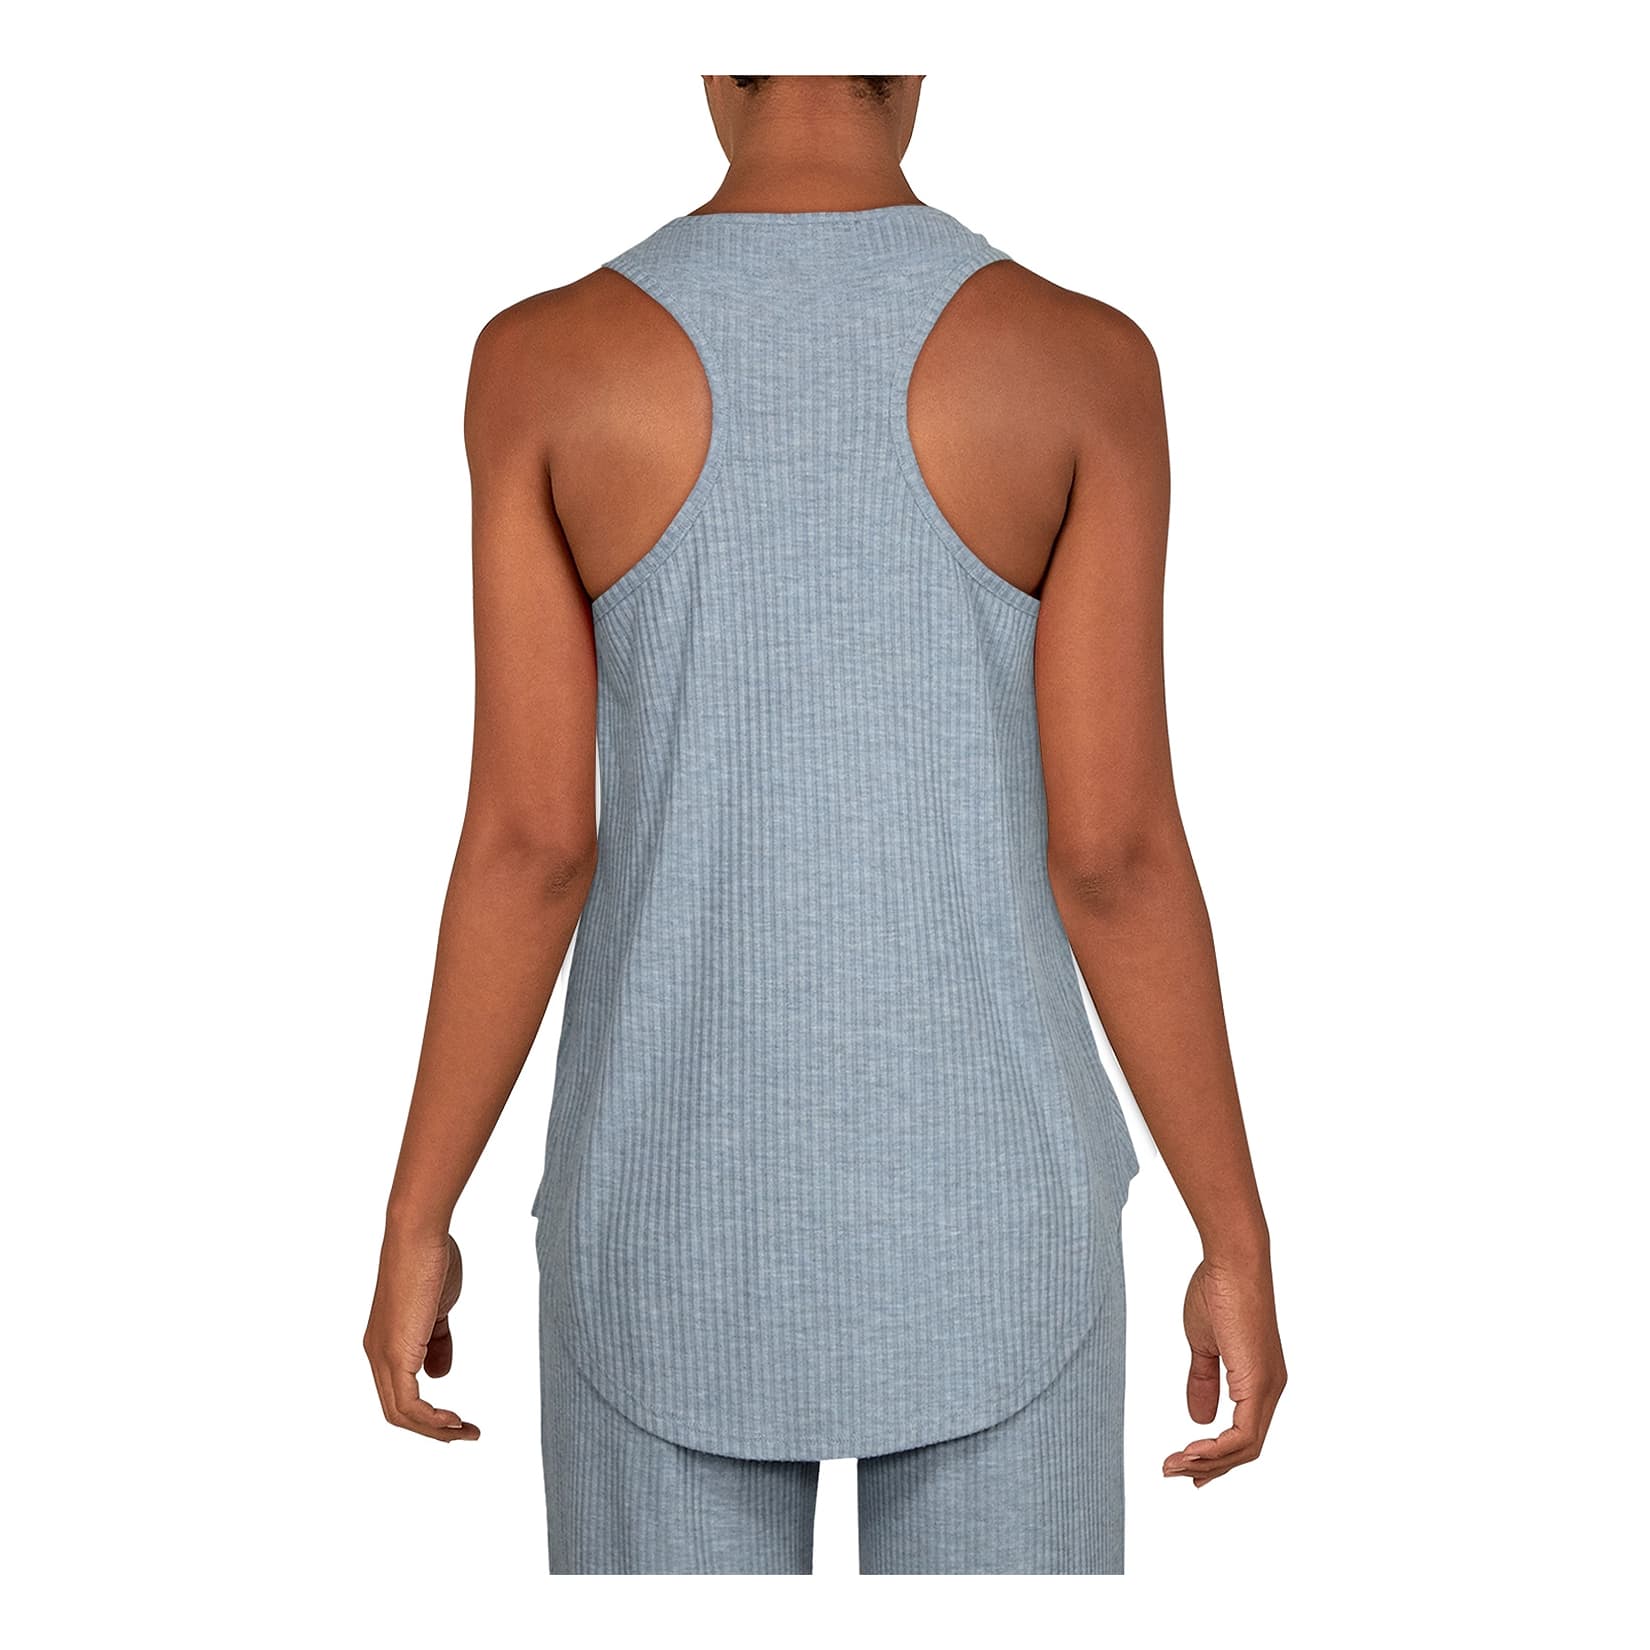 Natural Reflections® Women’s Rib-Knit Tank Top - Blue Heather - back